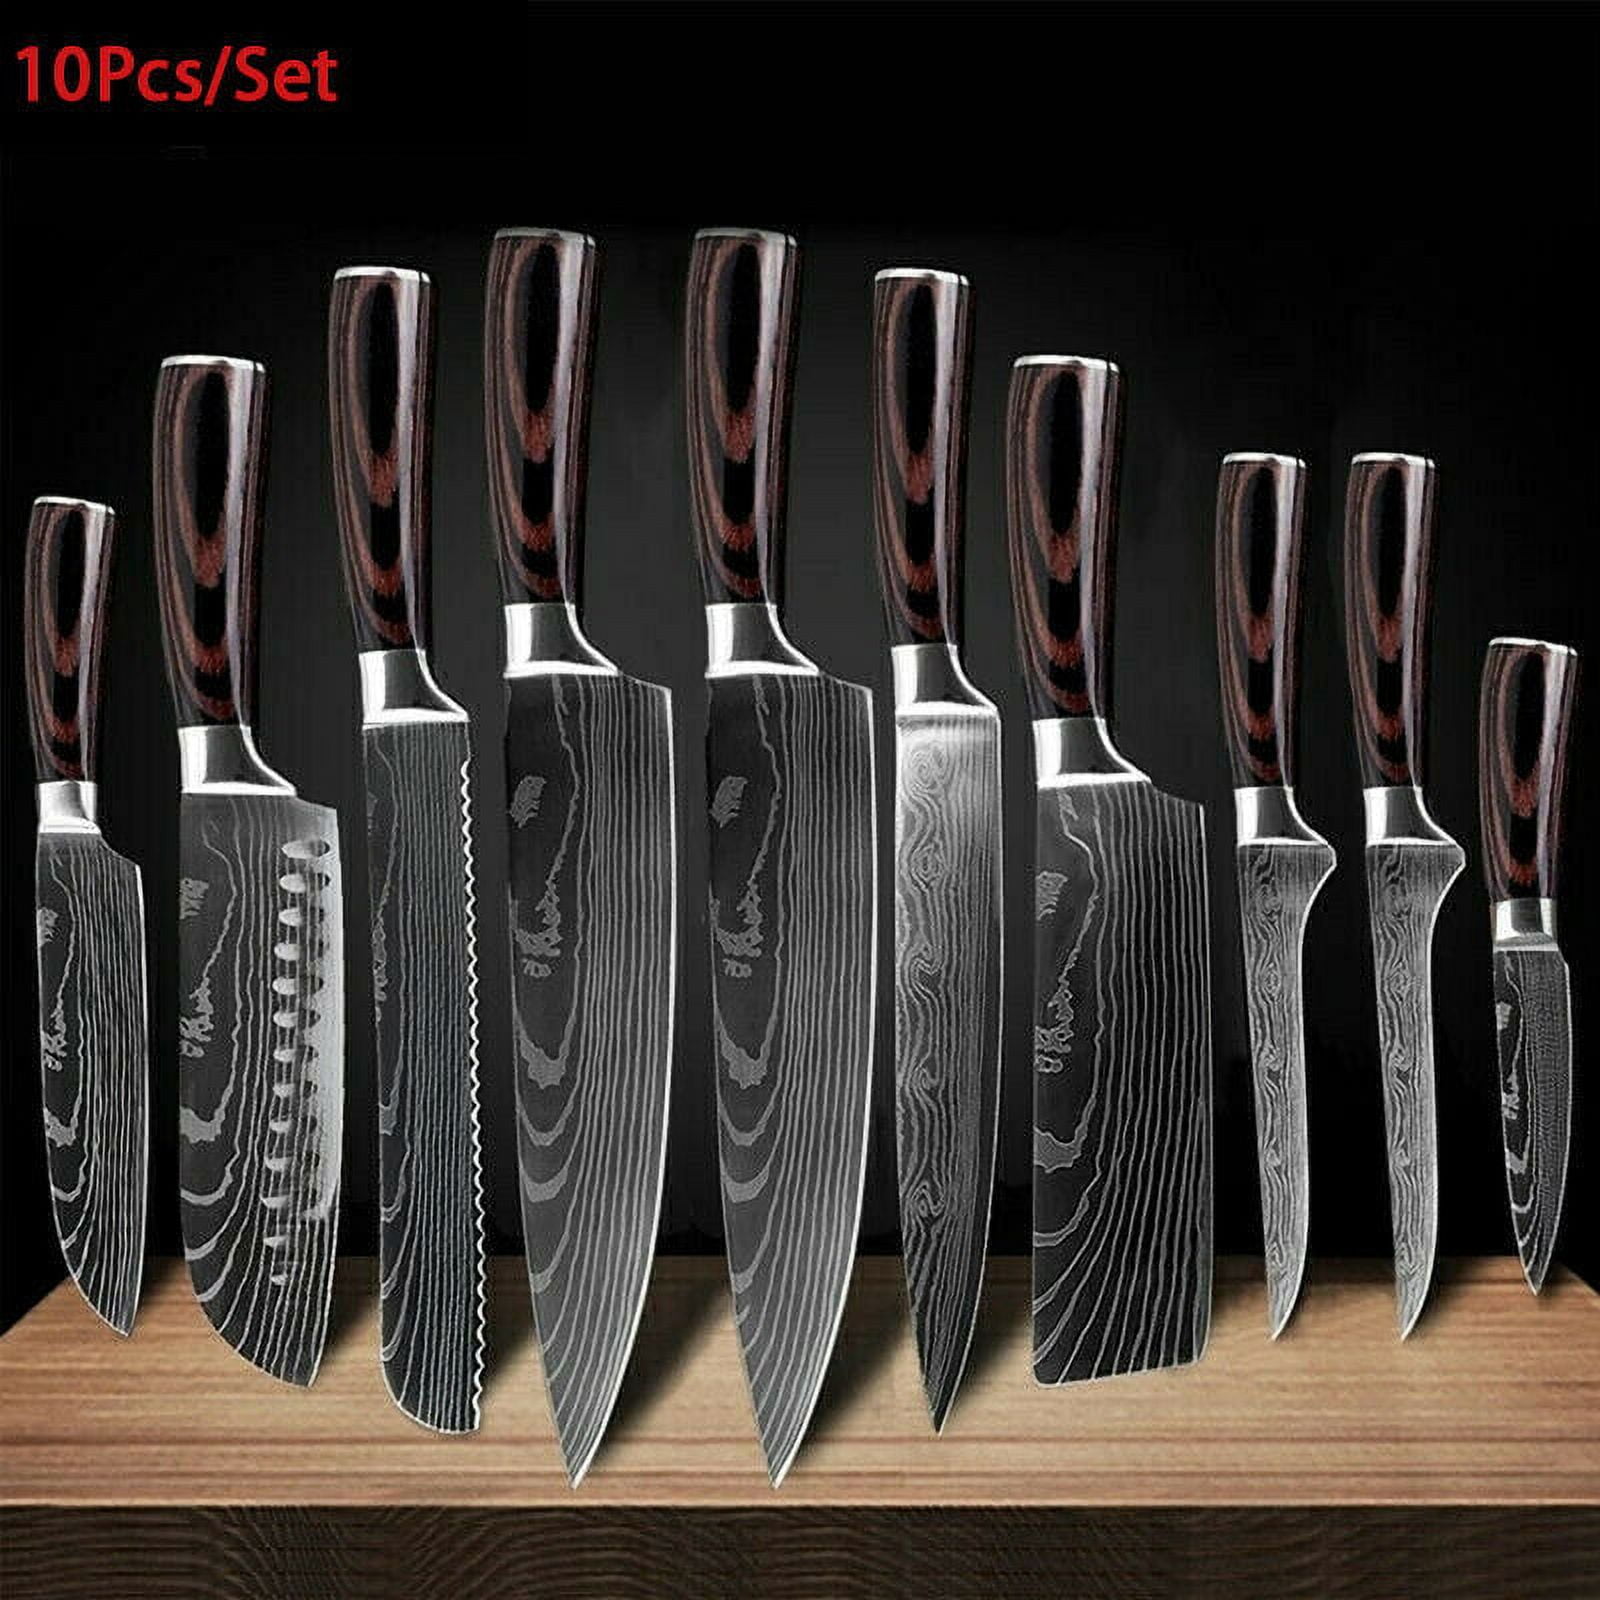 6pcs Kitchen Knife Set Japanese Stainless Steel Cleaver Chef Knives Shears  Gift